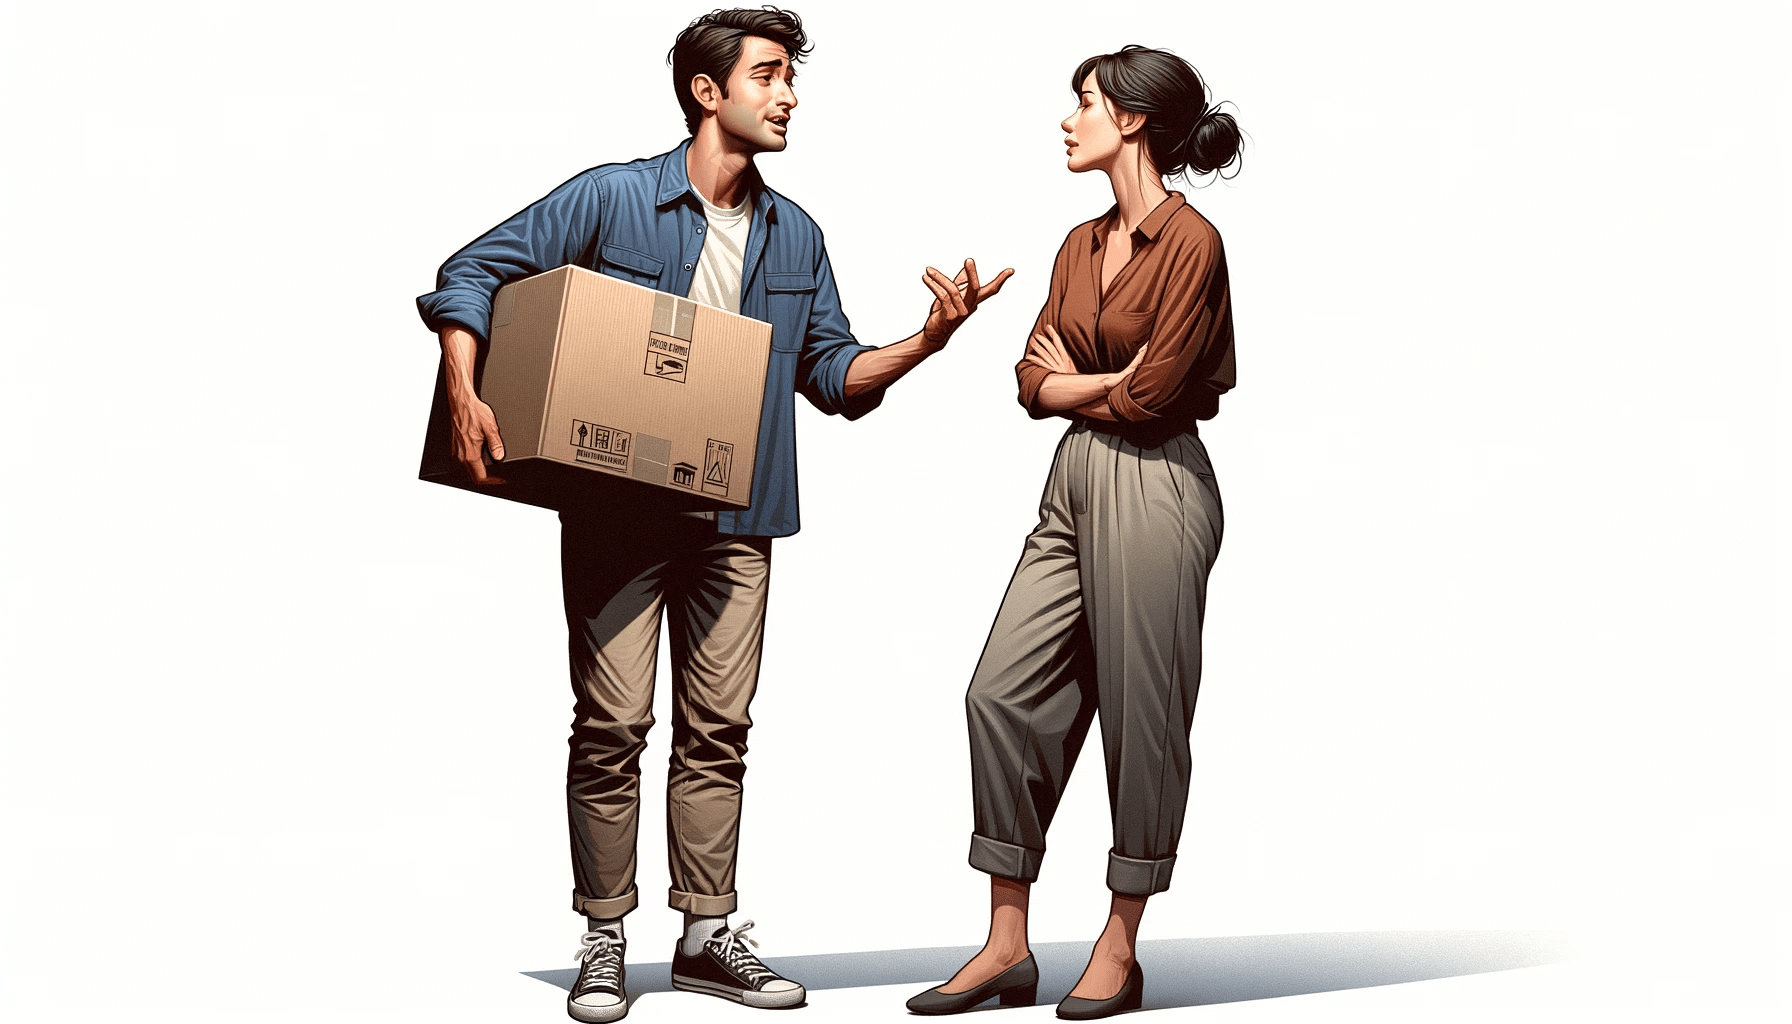 a man carrying a box talking with a woman